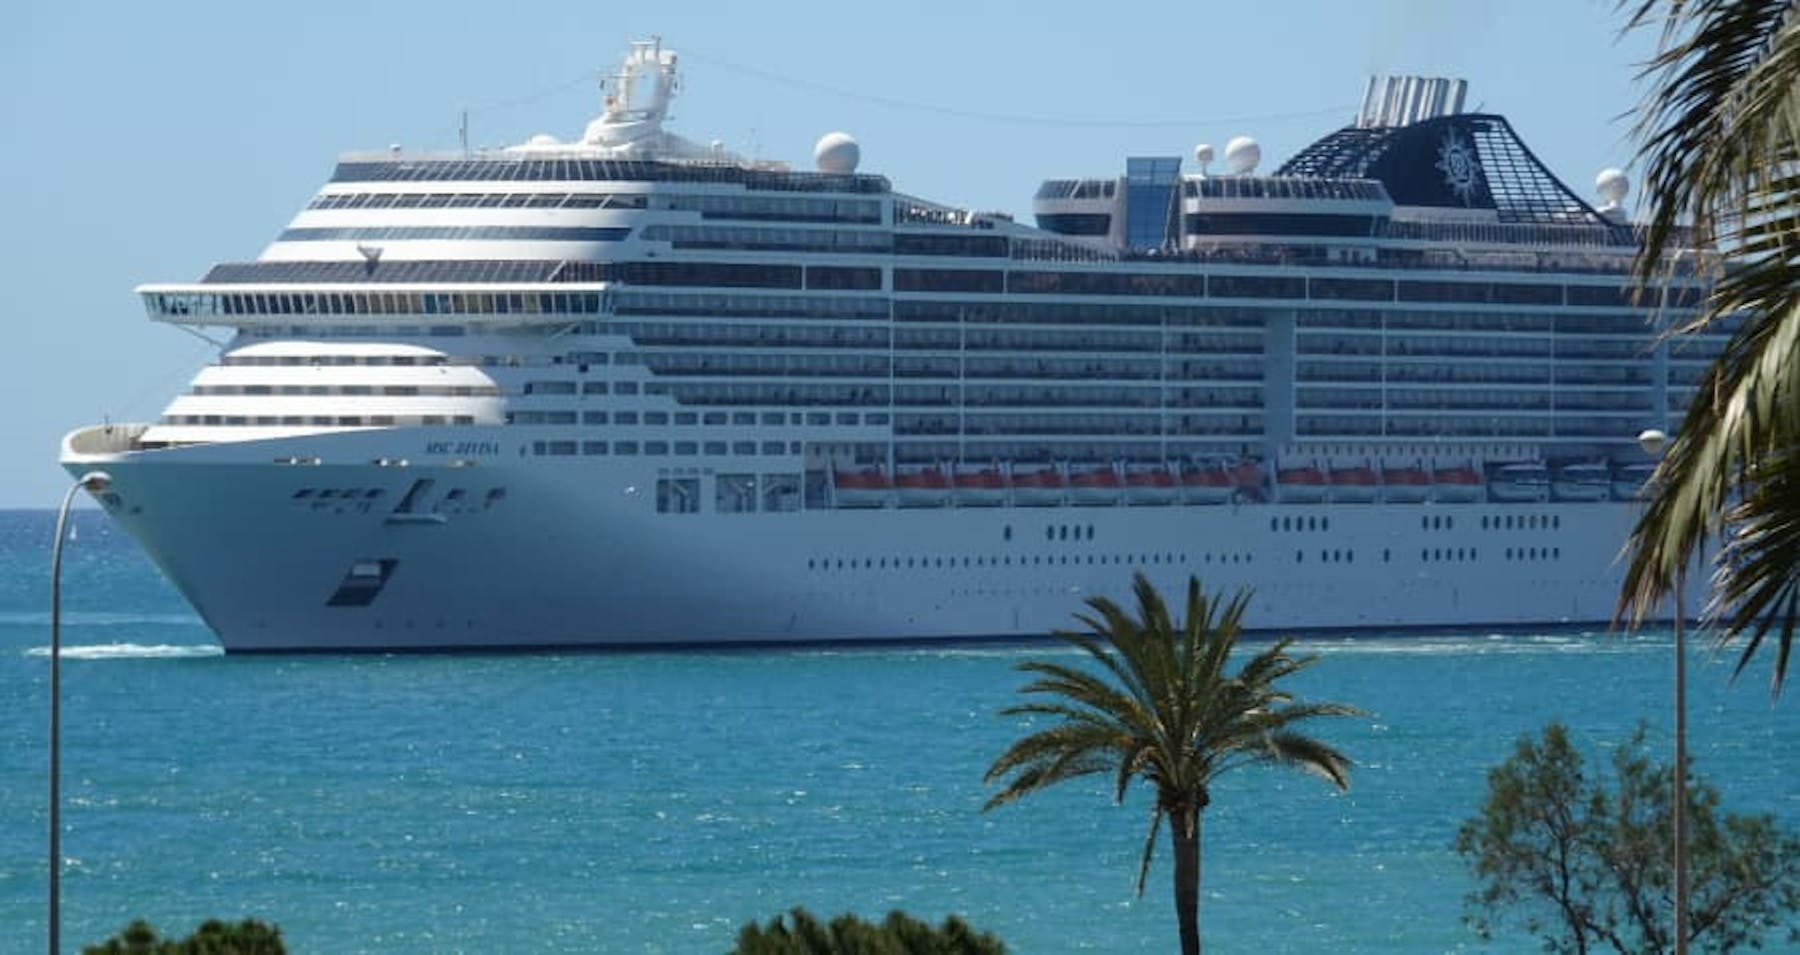 cruise ship on sparking water, clear sky, surrounded by palm trees